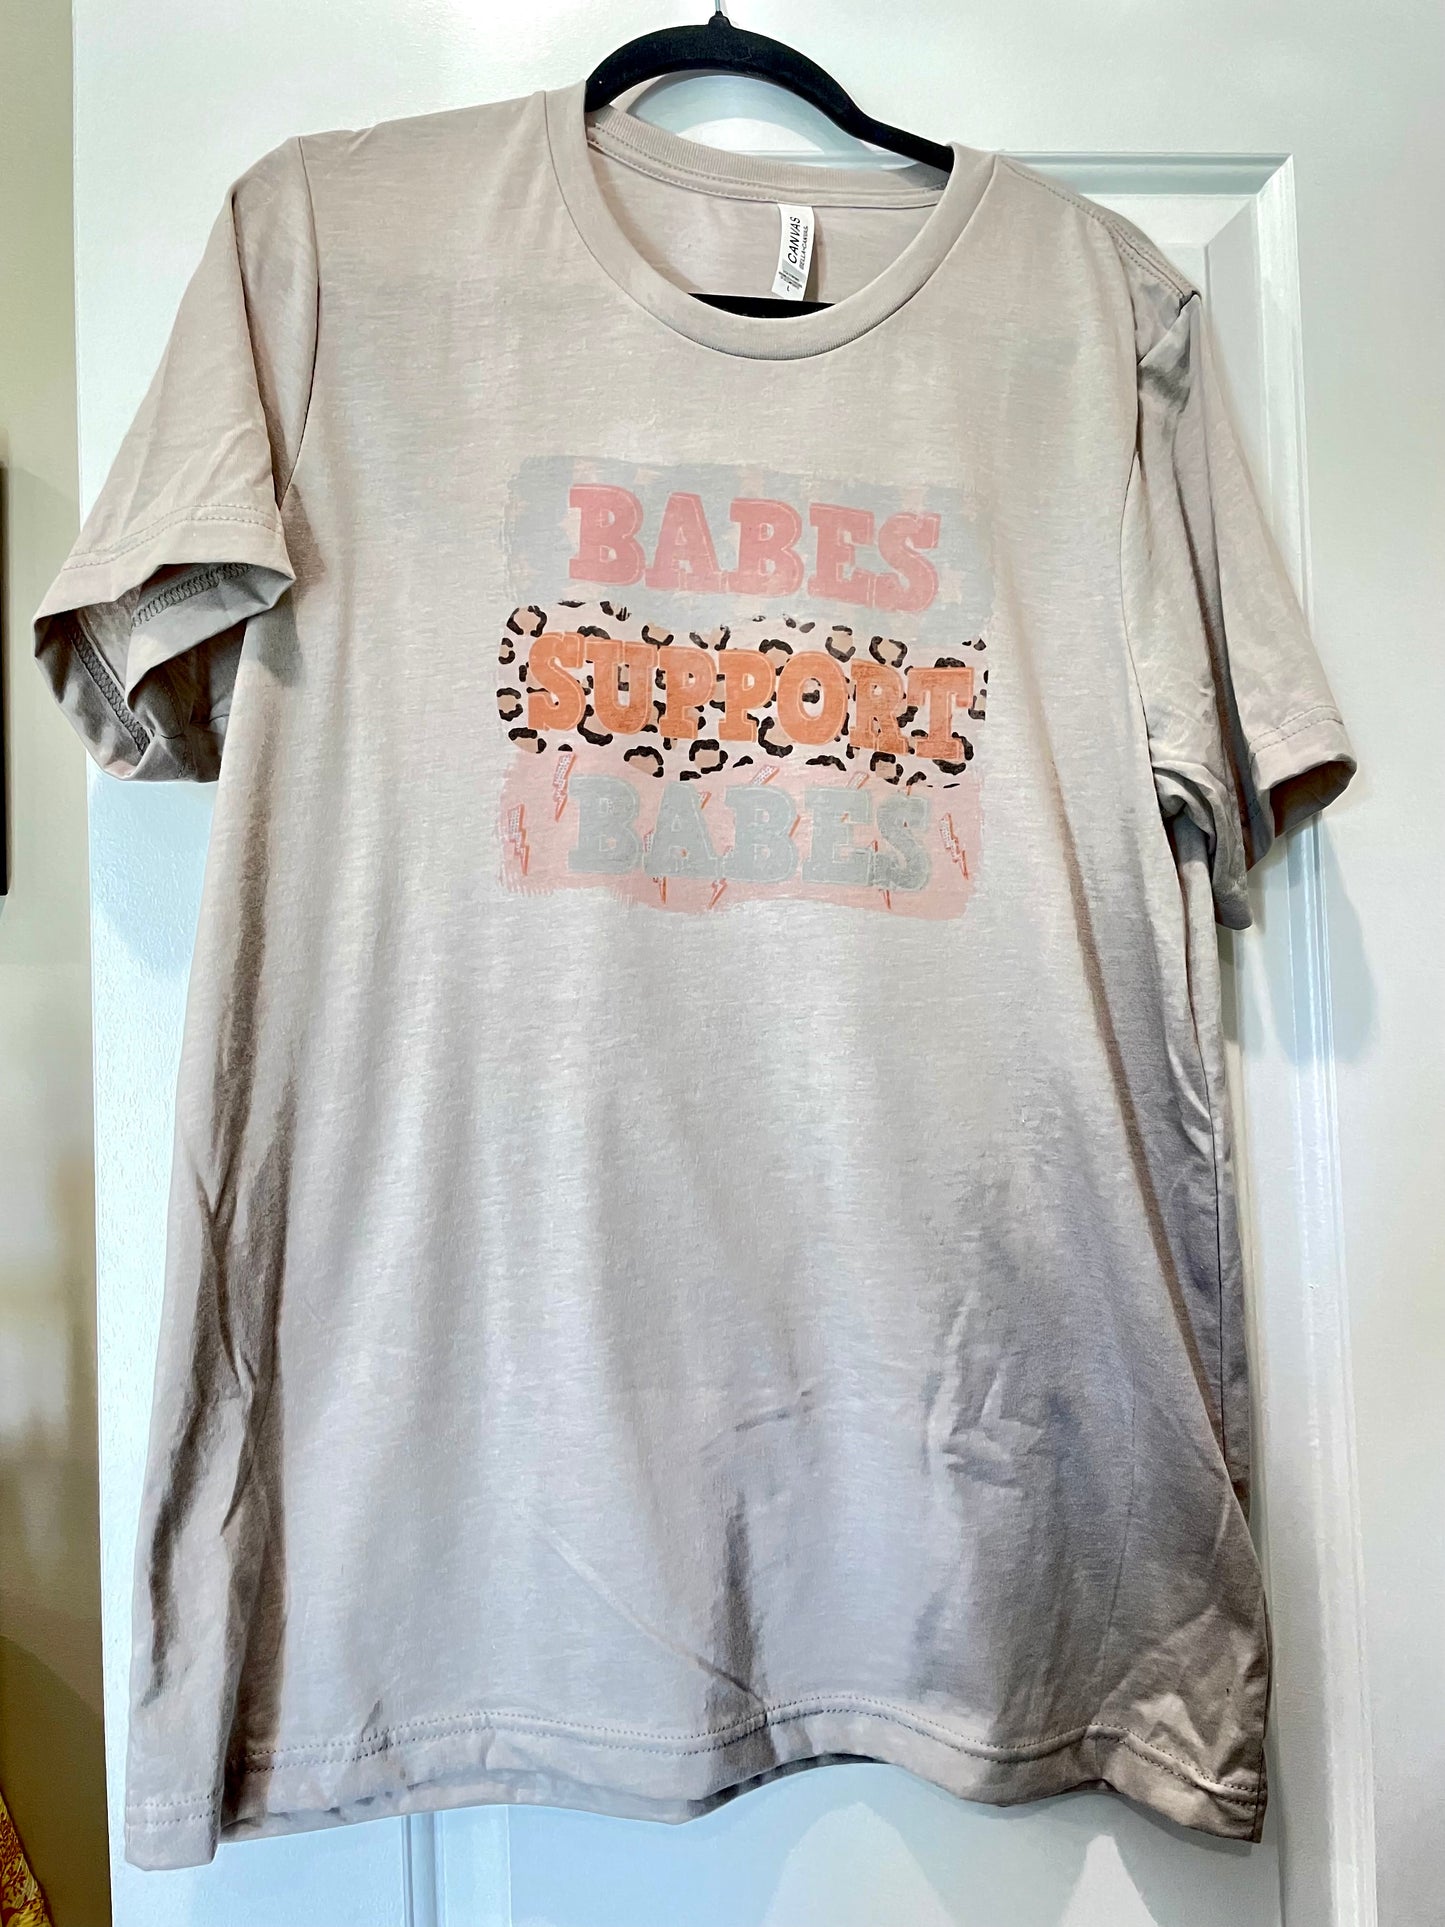 Babes support Babes Graphic T-shirt